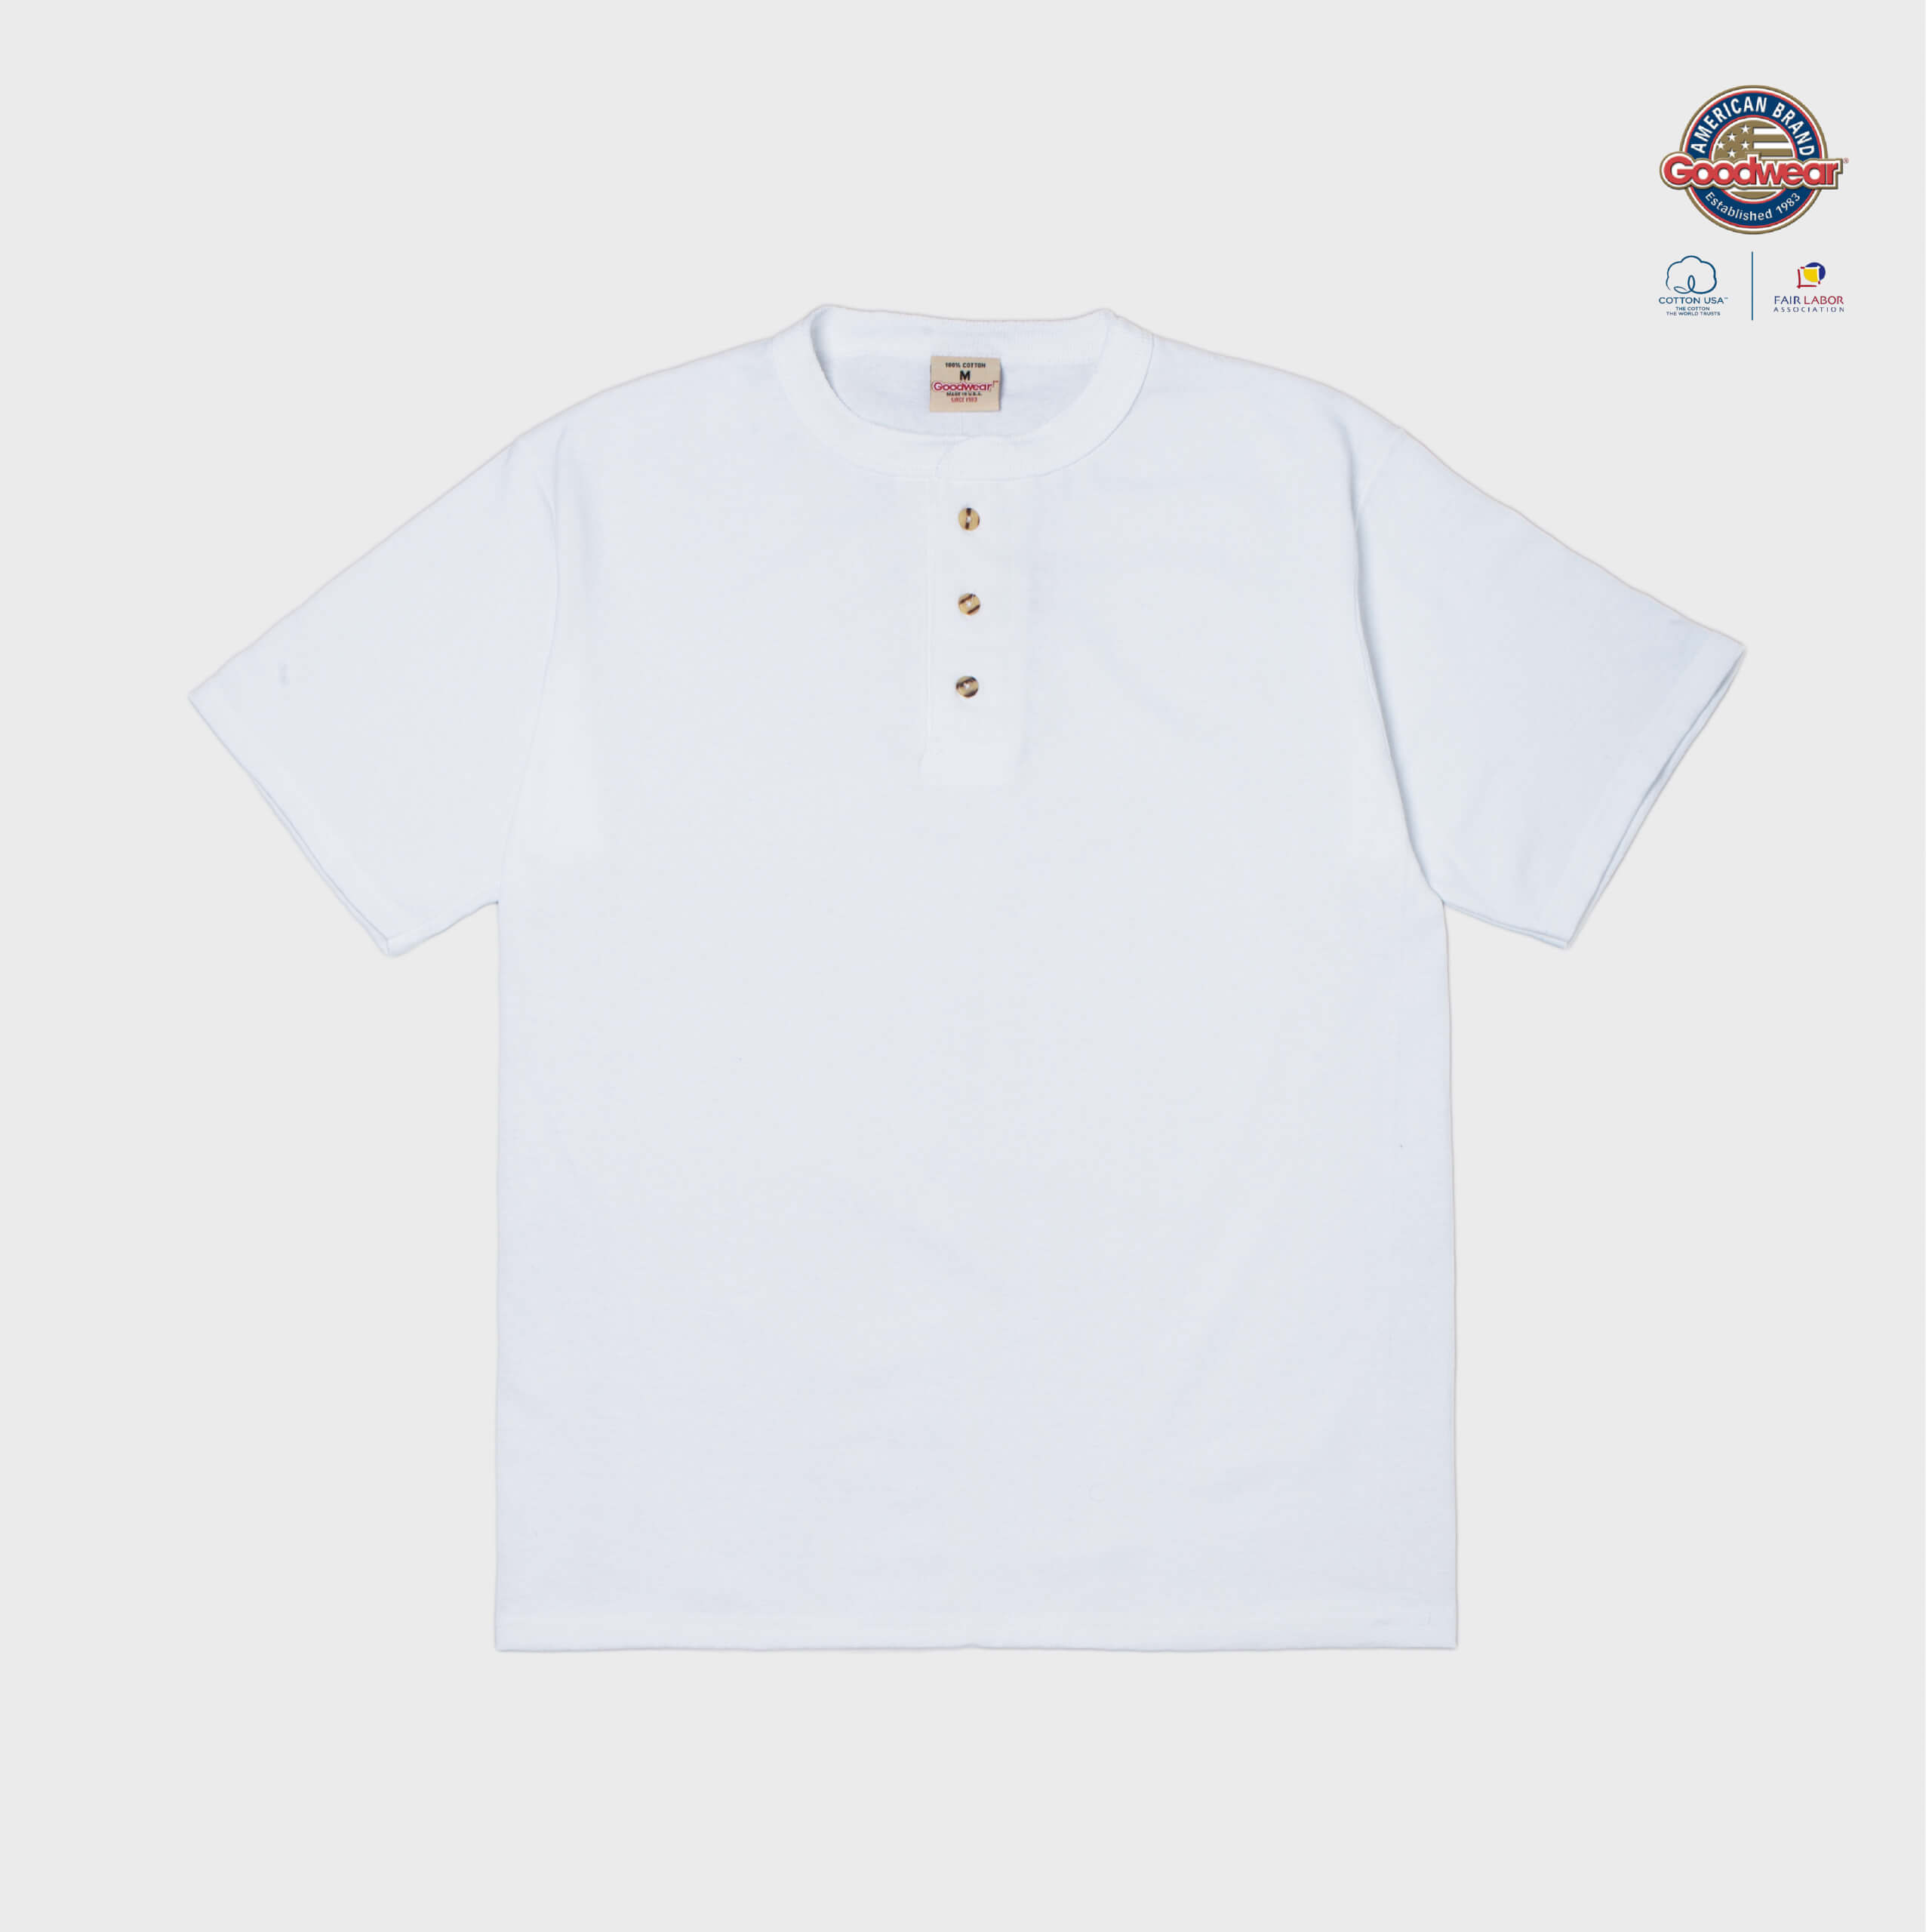 henley-s-s-tee-classic-fit-white_p2